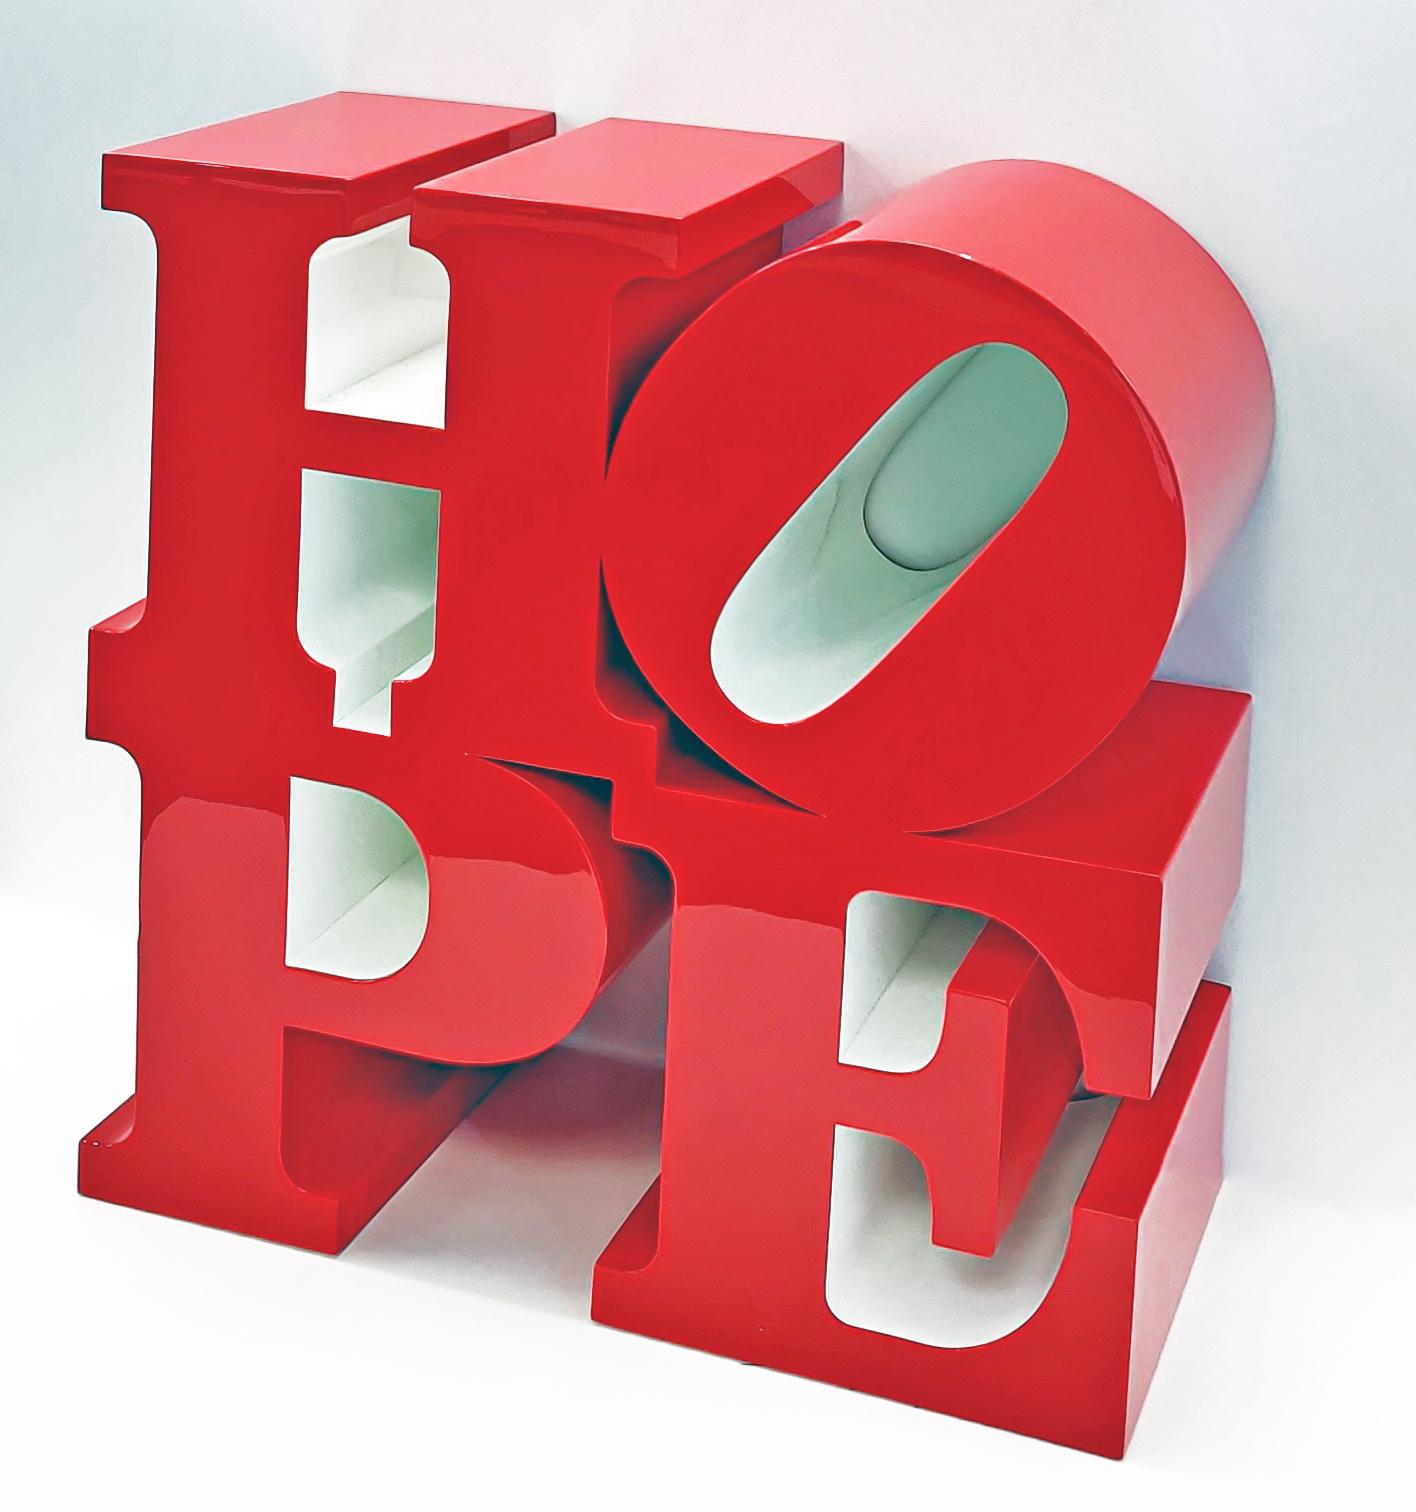 HOPE (RED/WHITE) SCULPTURE - Sculpture by Robert Indiana